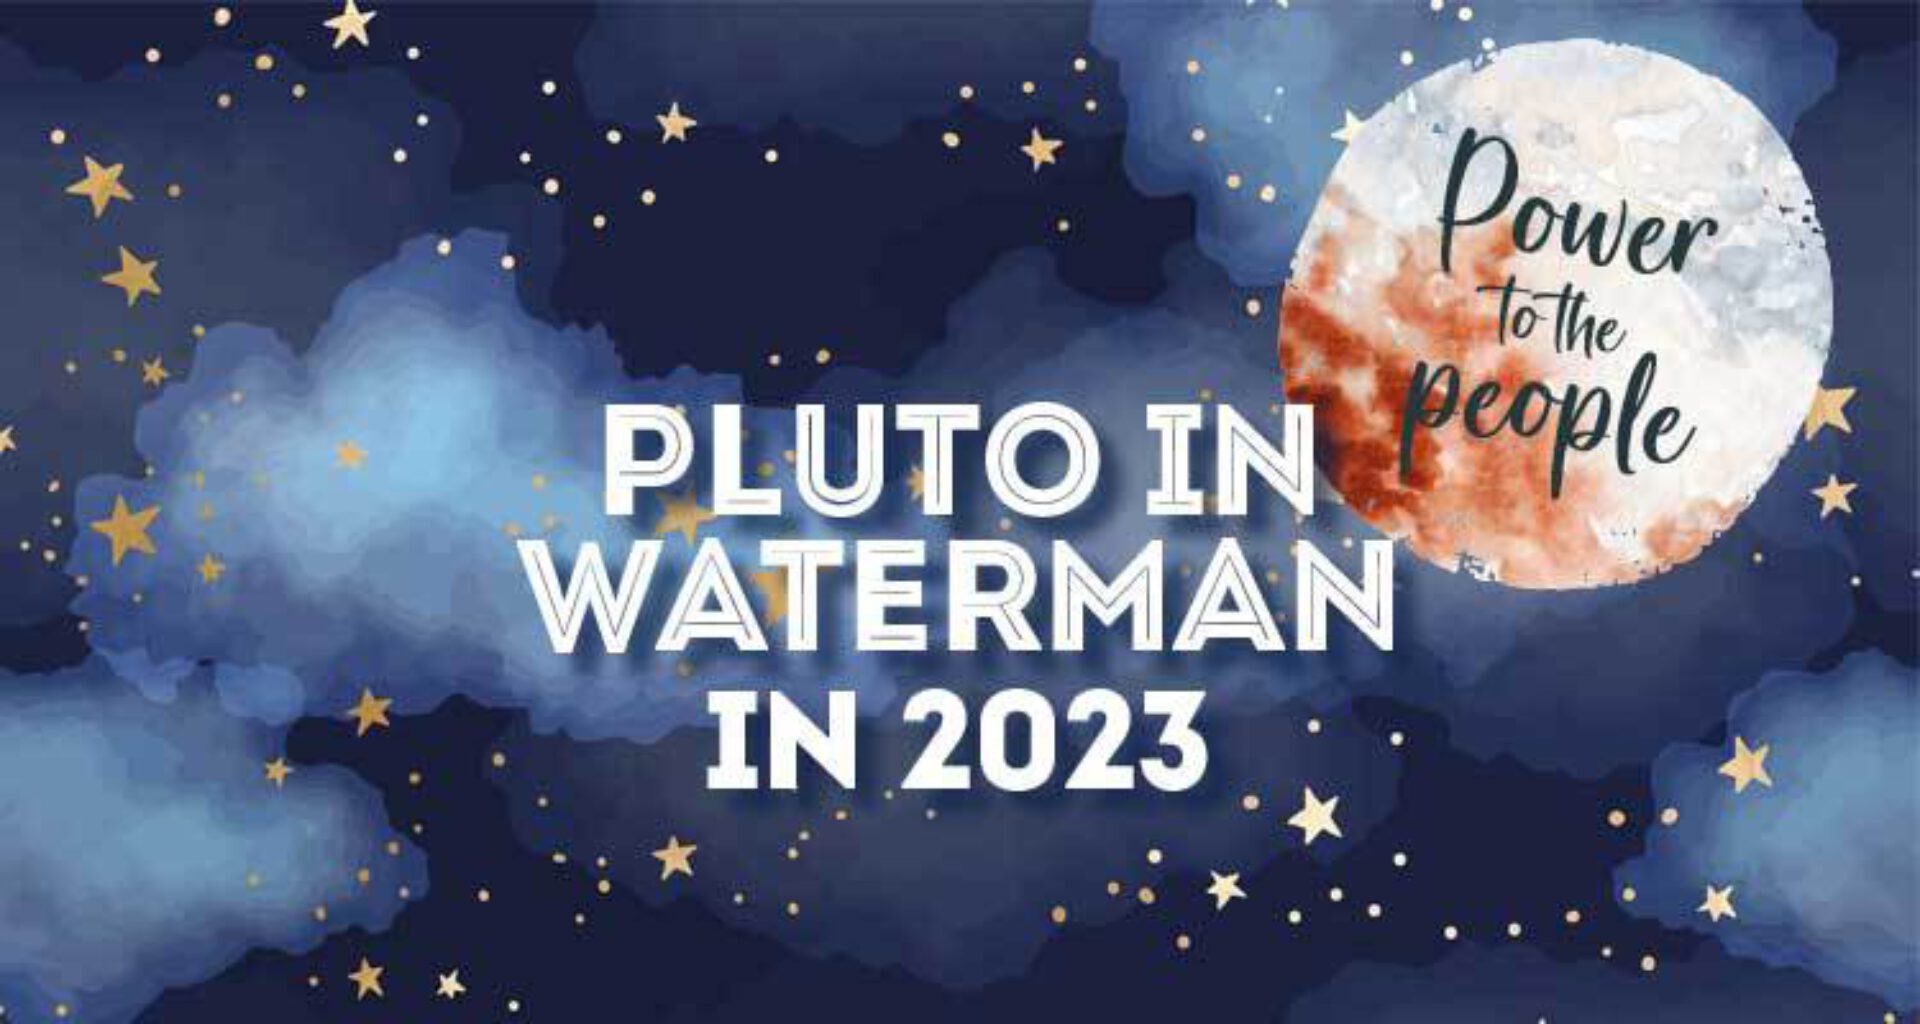 Pluto in Waterman in 2023 • Power to the people